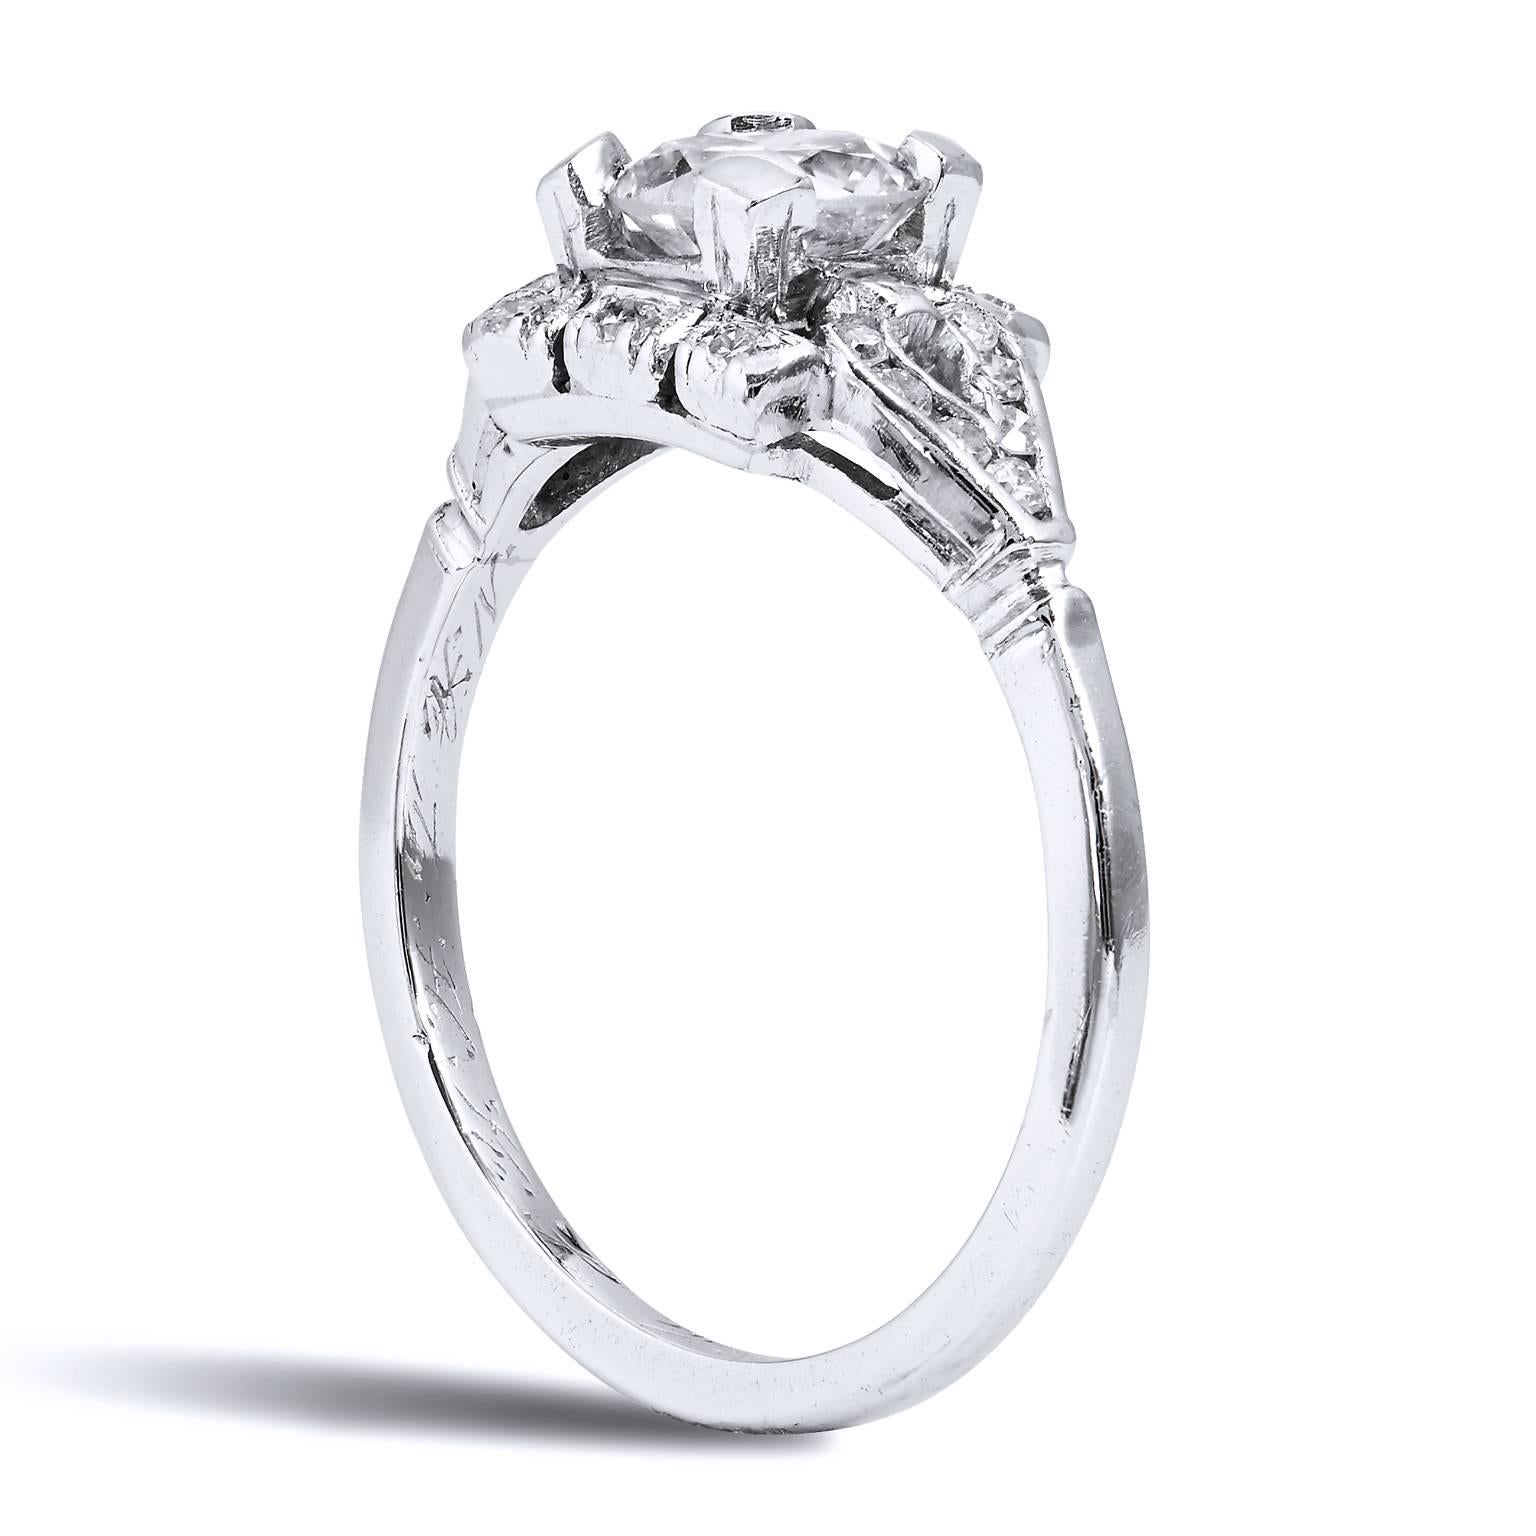 Platinum Art Deco 0.93 Carat Diamond Engagement Ring Size 5.5

This estate ring is absolutely stunning.  It is very ornate and is from the Art Deco era.  The year, 1936 is engraved inside of the ring.  A striking 0.69 carat Old European cut diamond